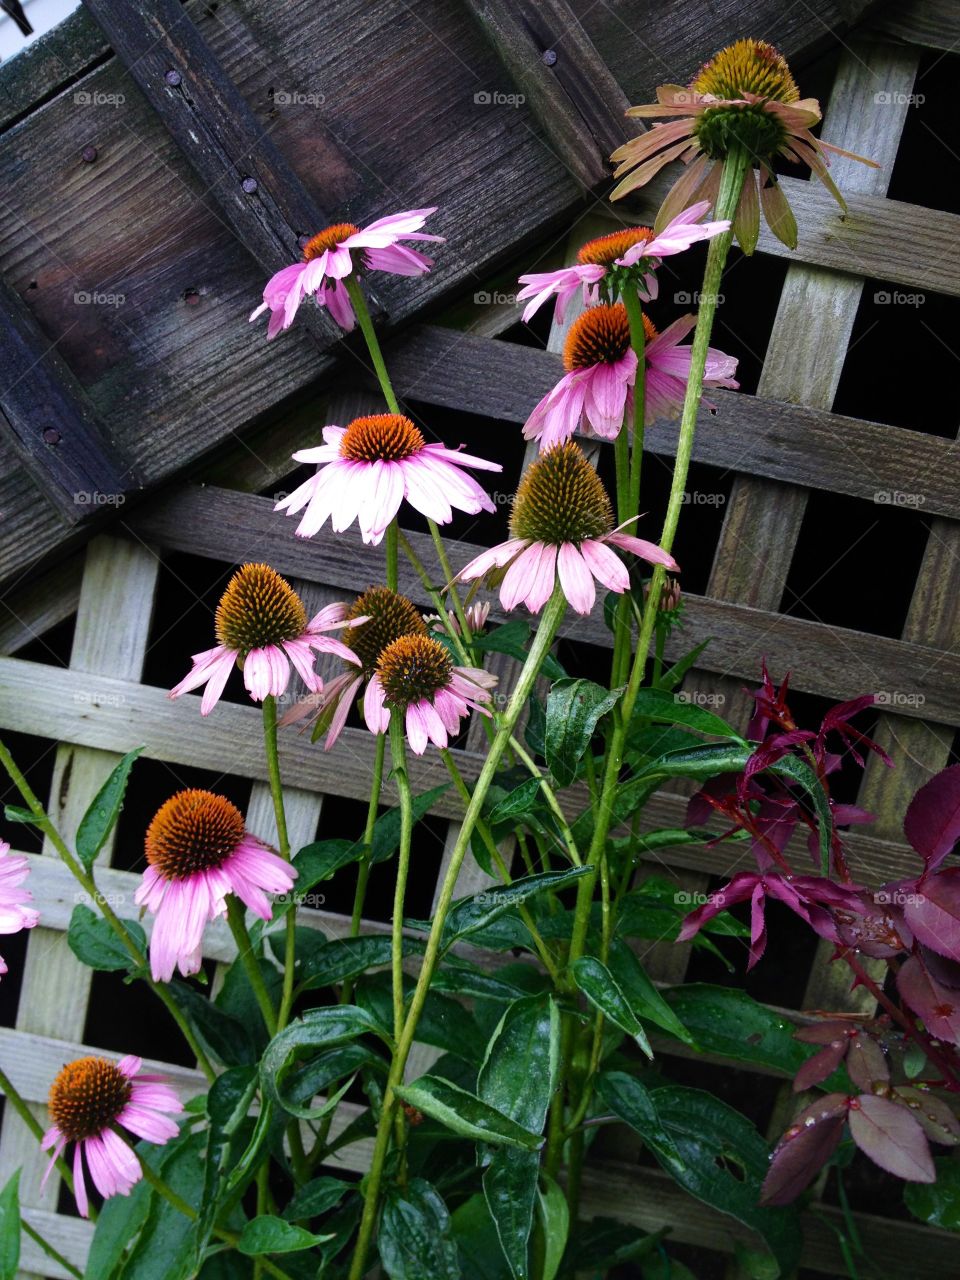 Group of Pink Cone Flowers, summer garden.